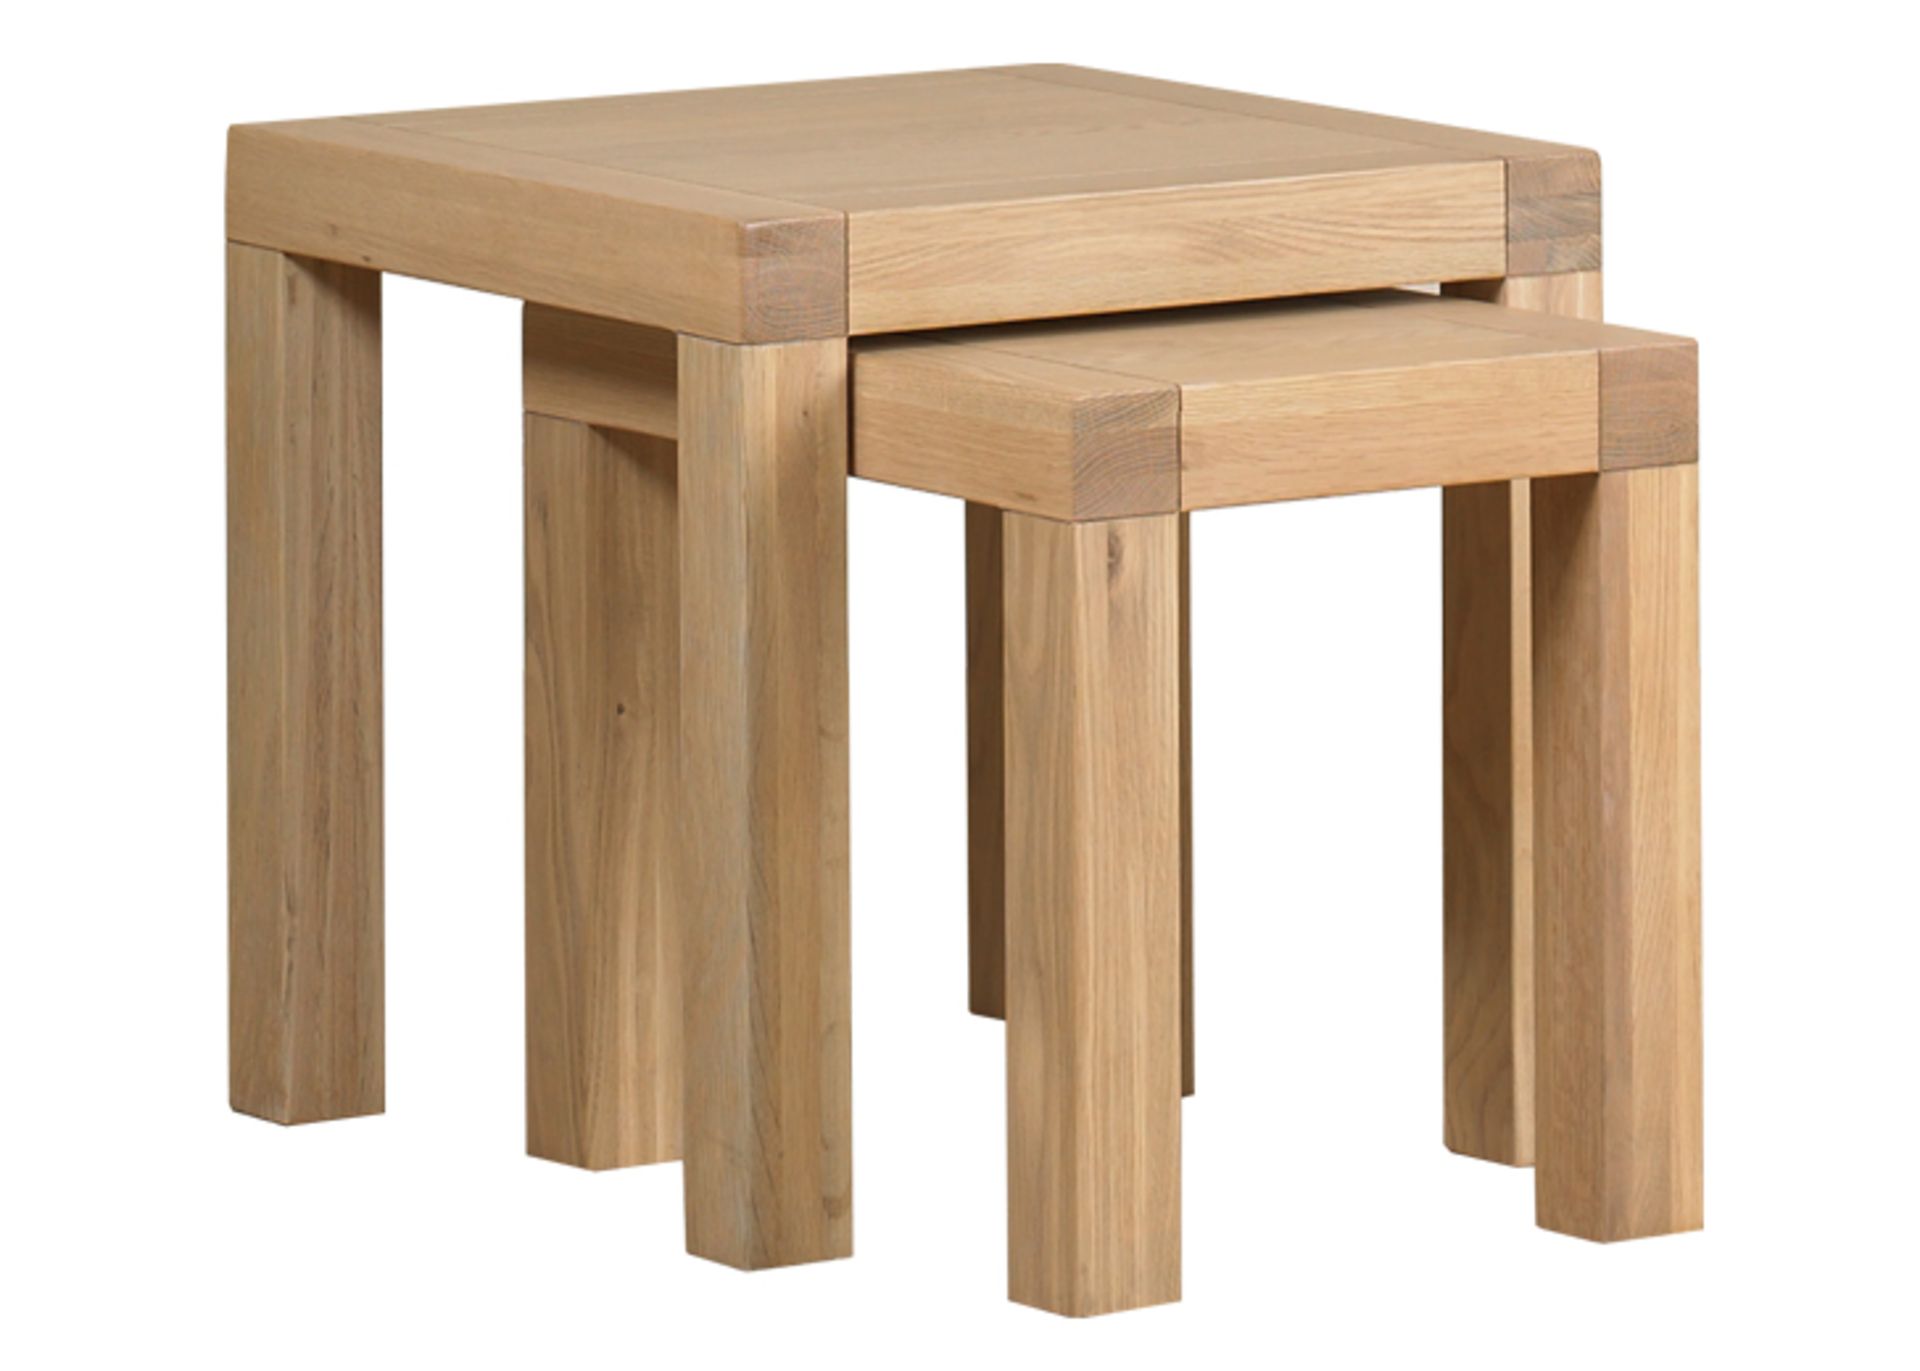 1 x Mark Webster Buckingham Nest of Two Tables  - White Wash Oak With a Timeless Design - Full of